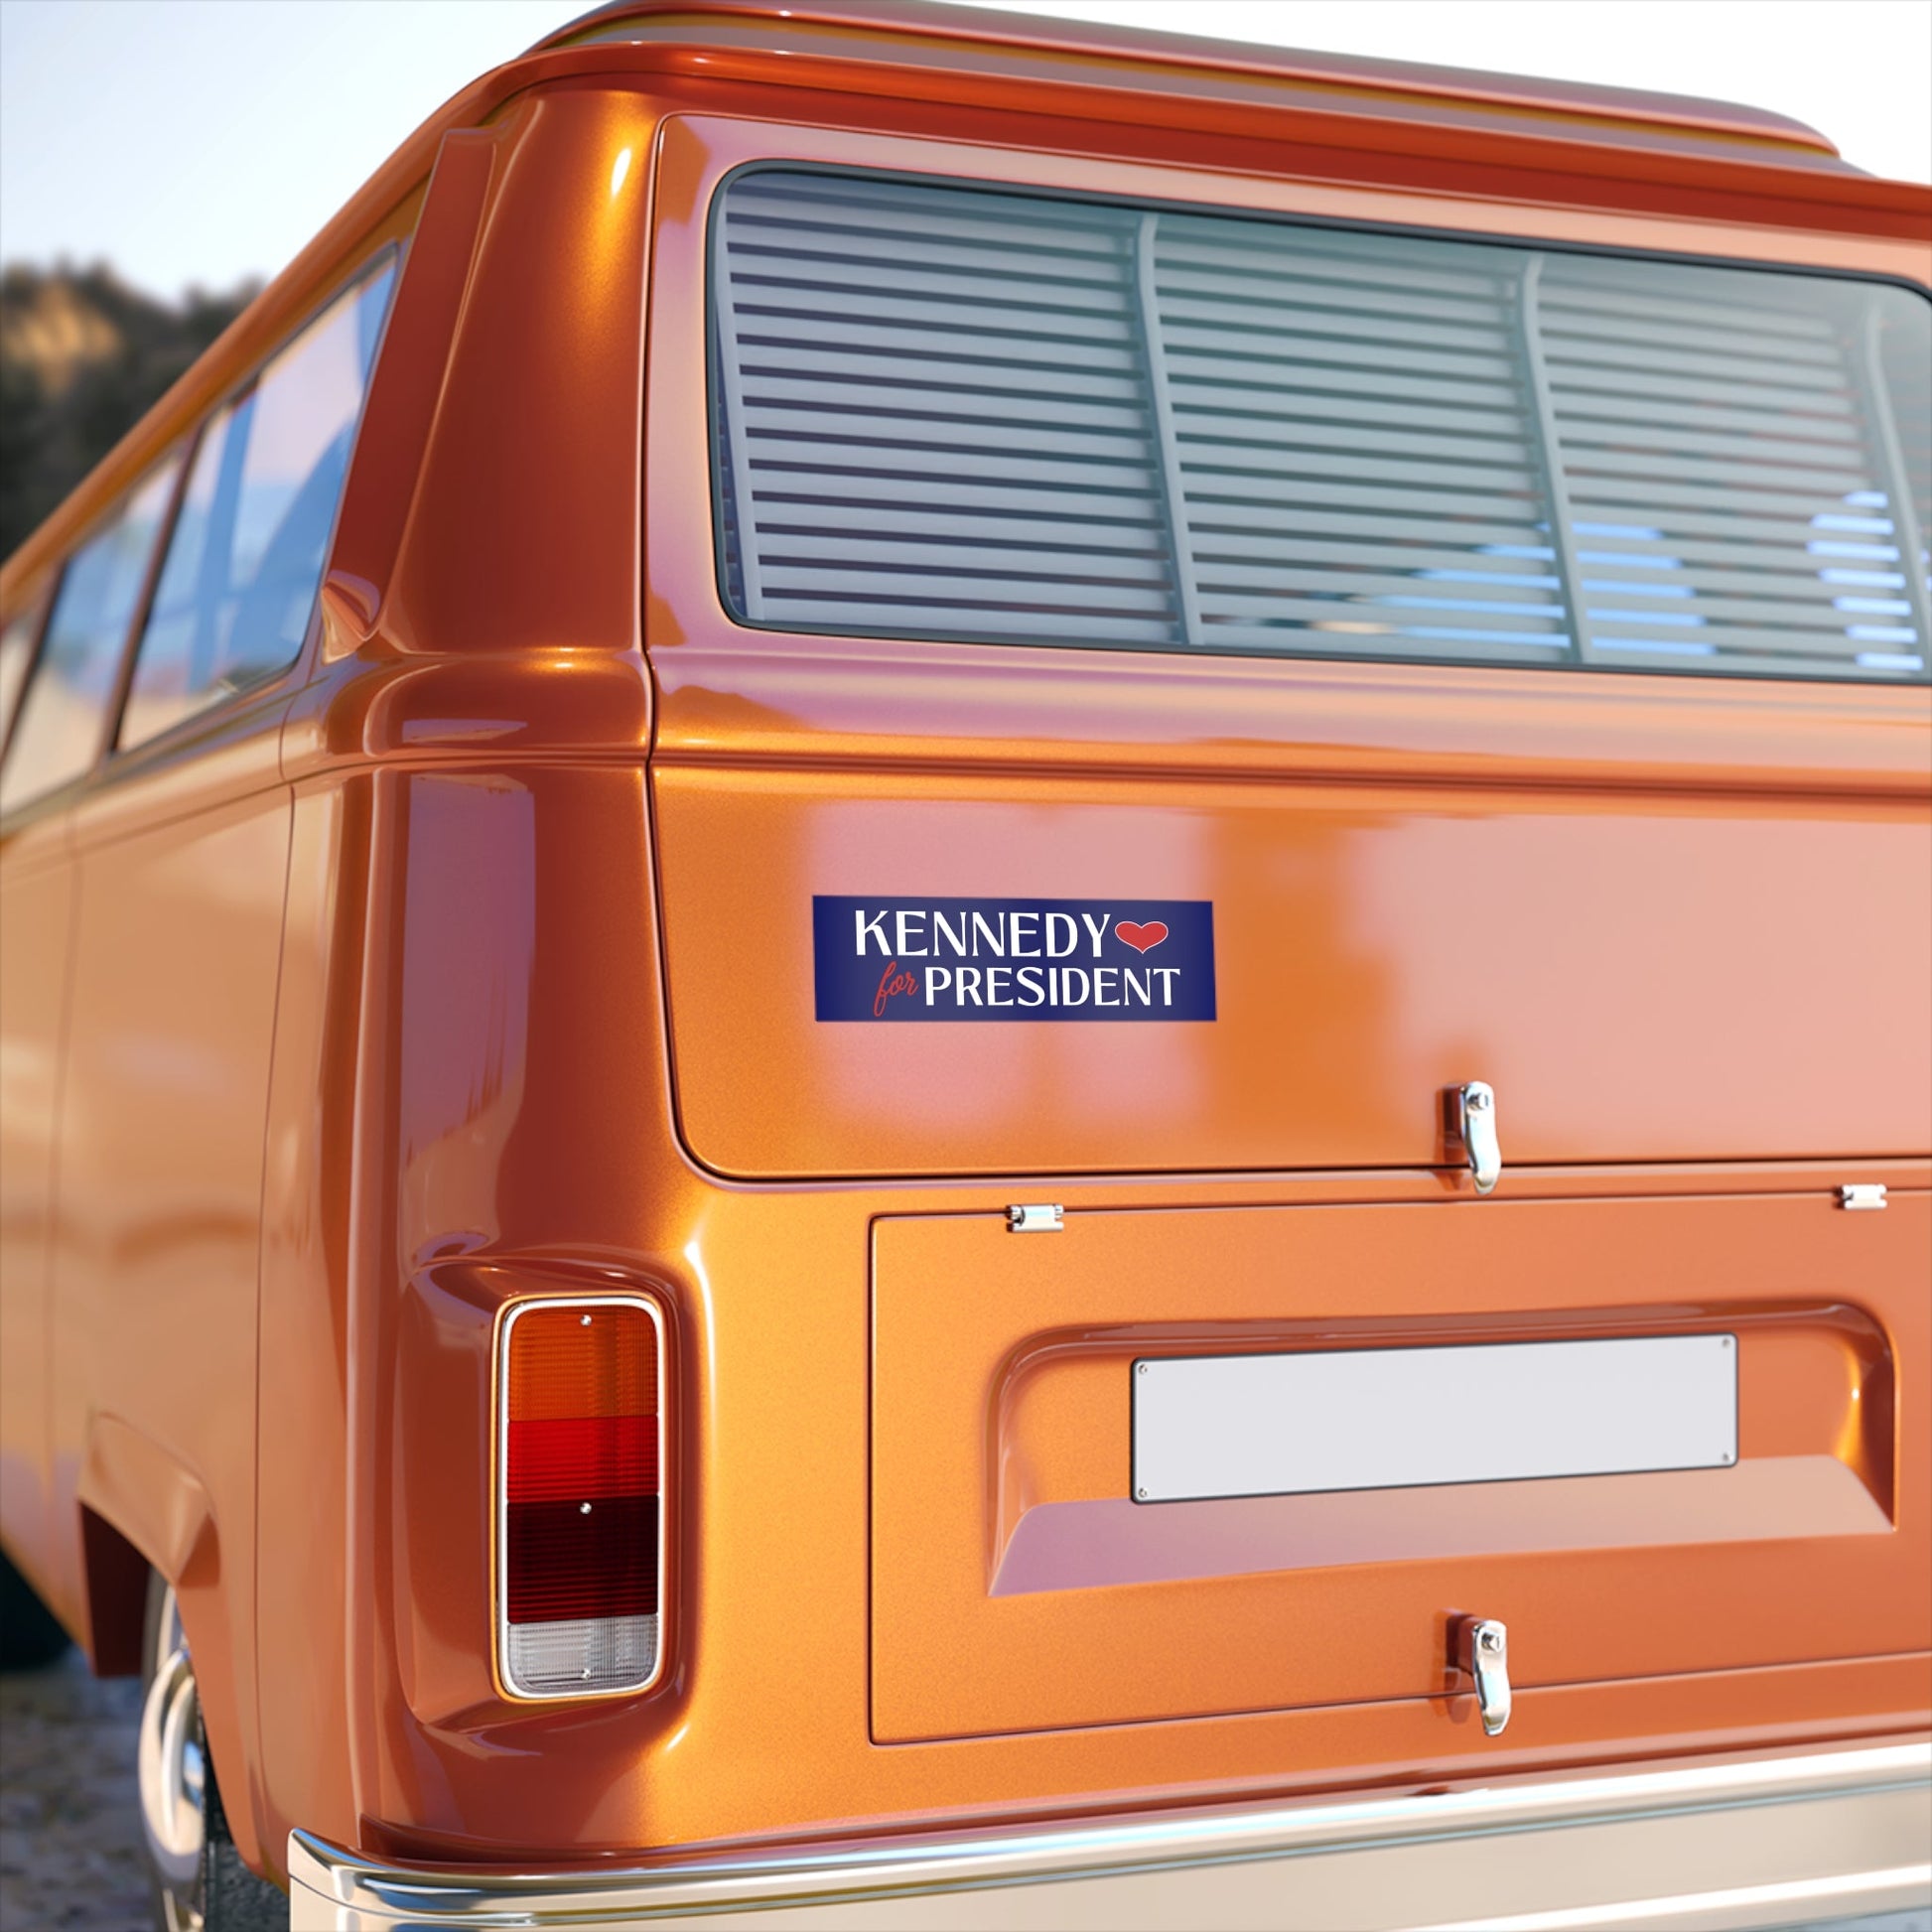 Kennedy for President ❤️ Bumper Sticker - TEAM KENNEDY. All rights reserved